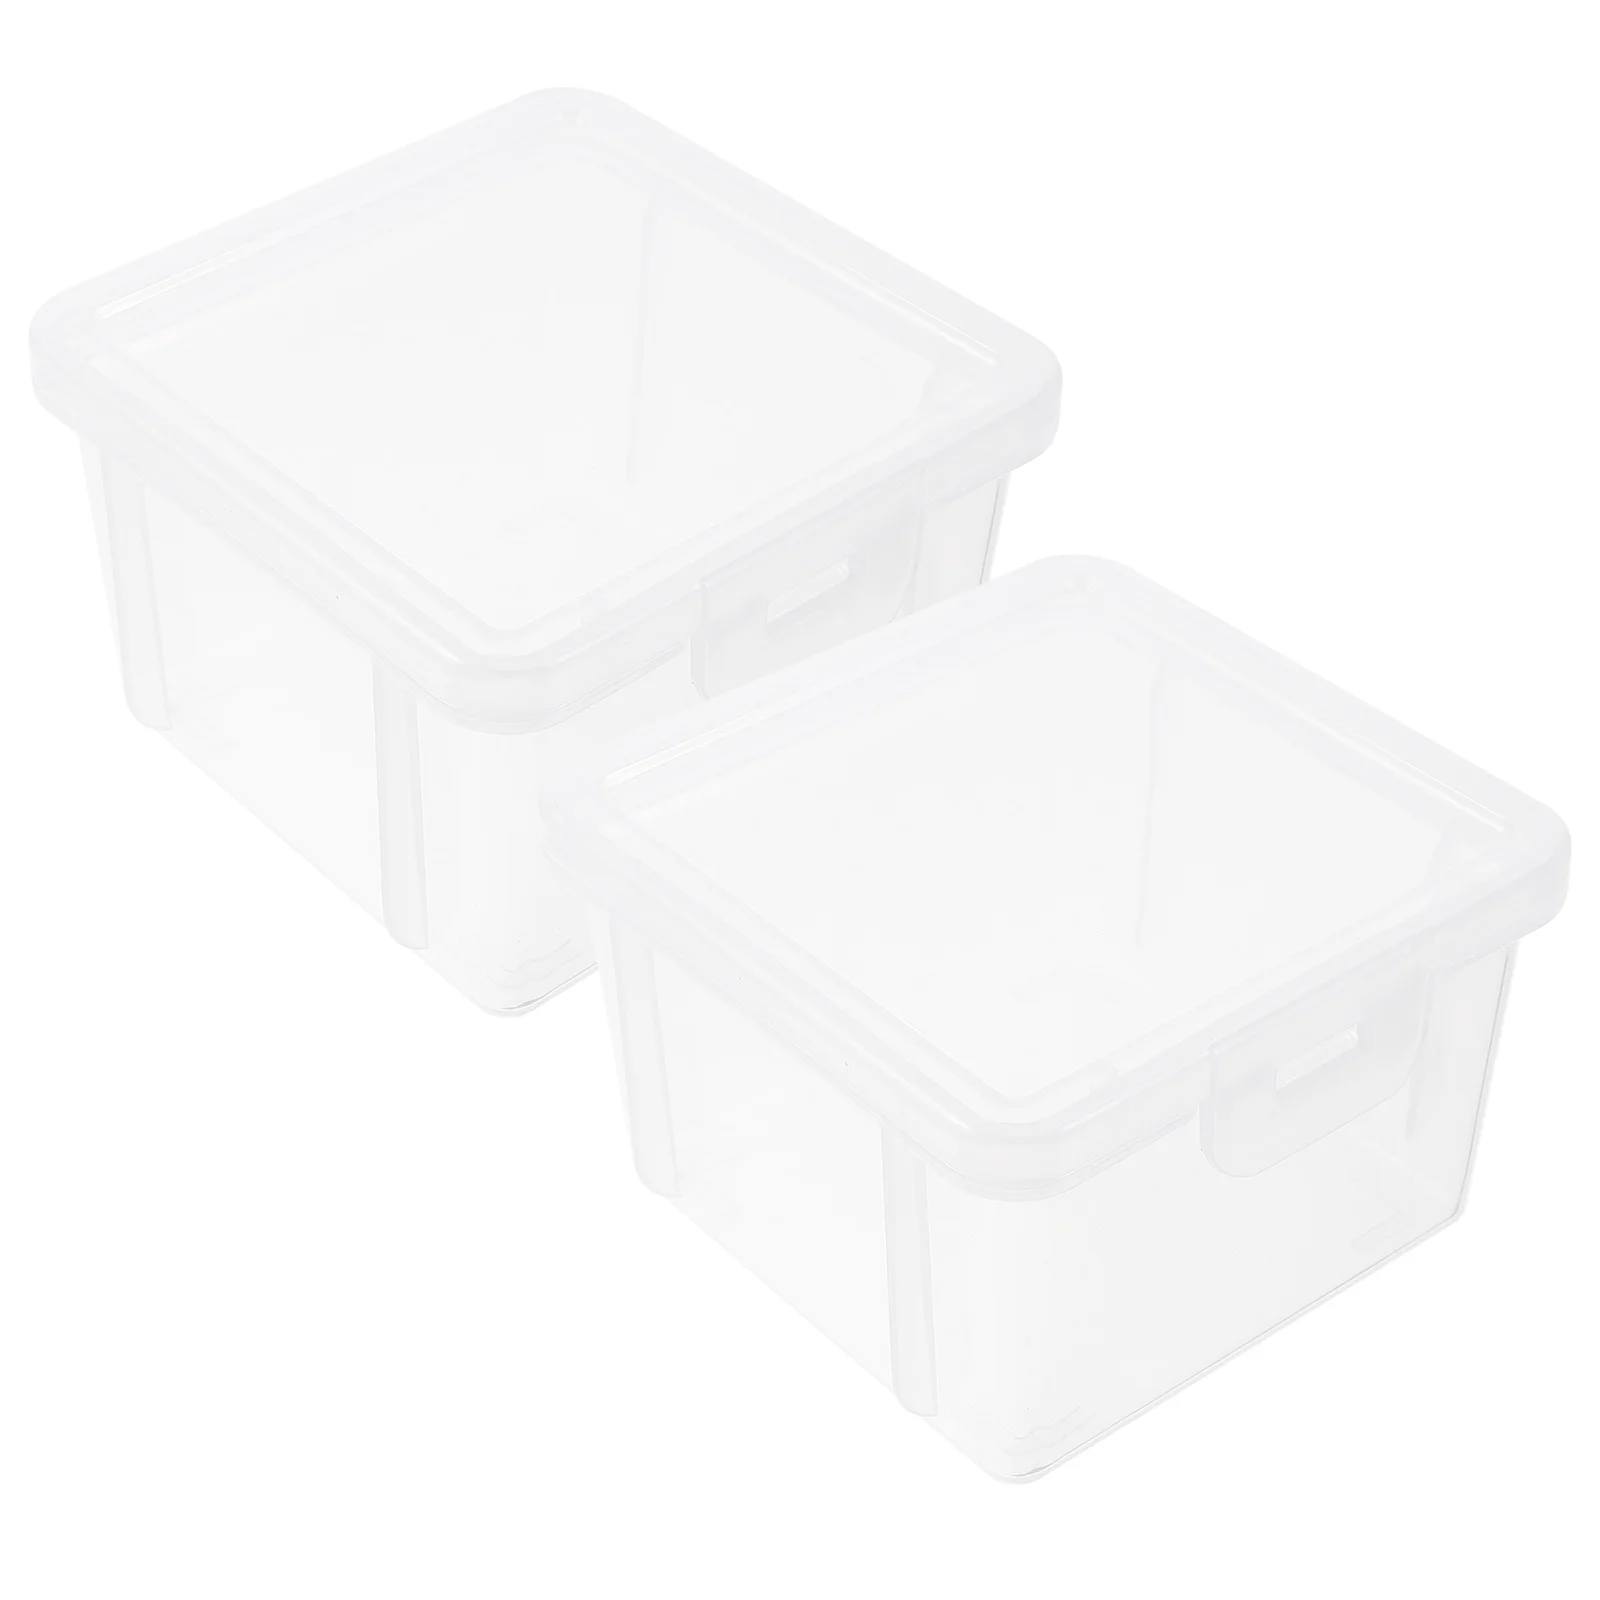 

2 Pcs Coins Collecting Clear Case Holders Collectors Professional Collection Box Storage Accessory Pp